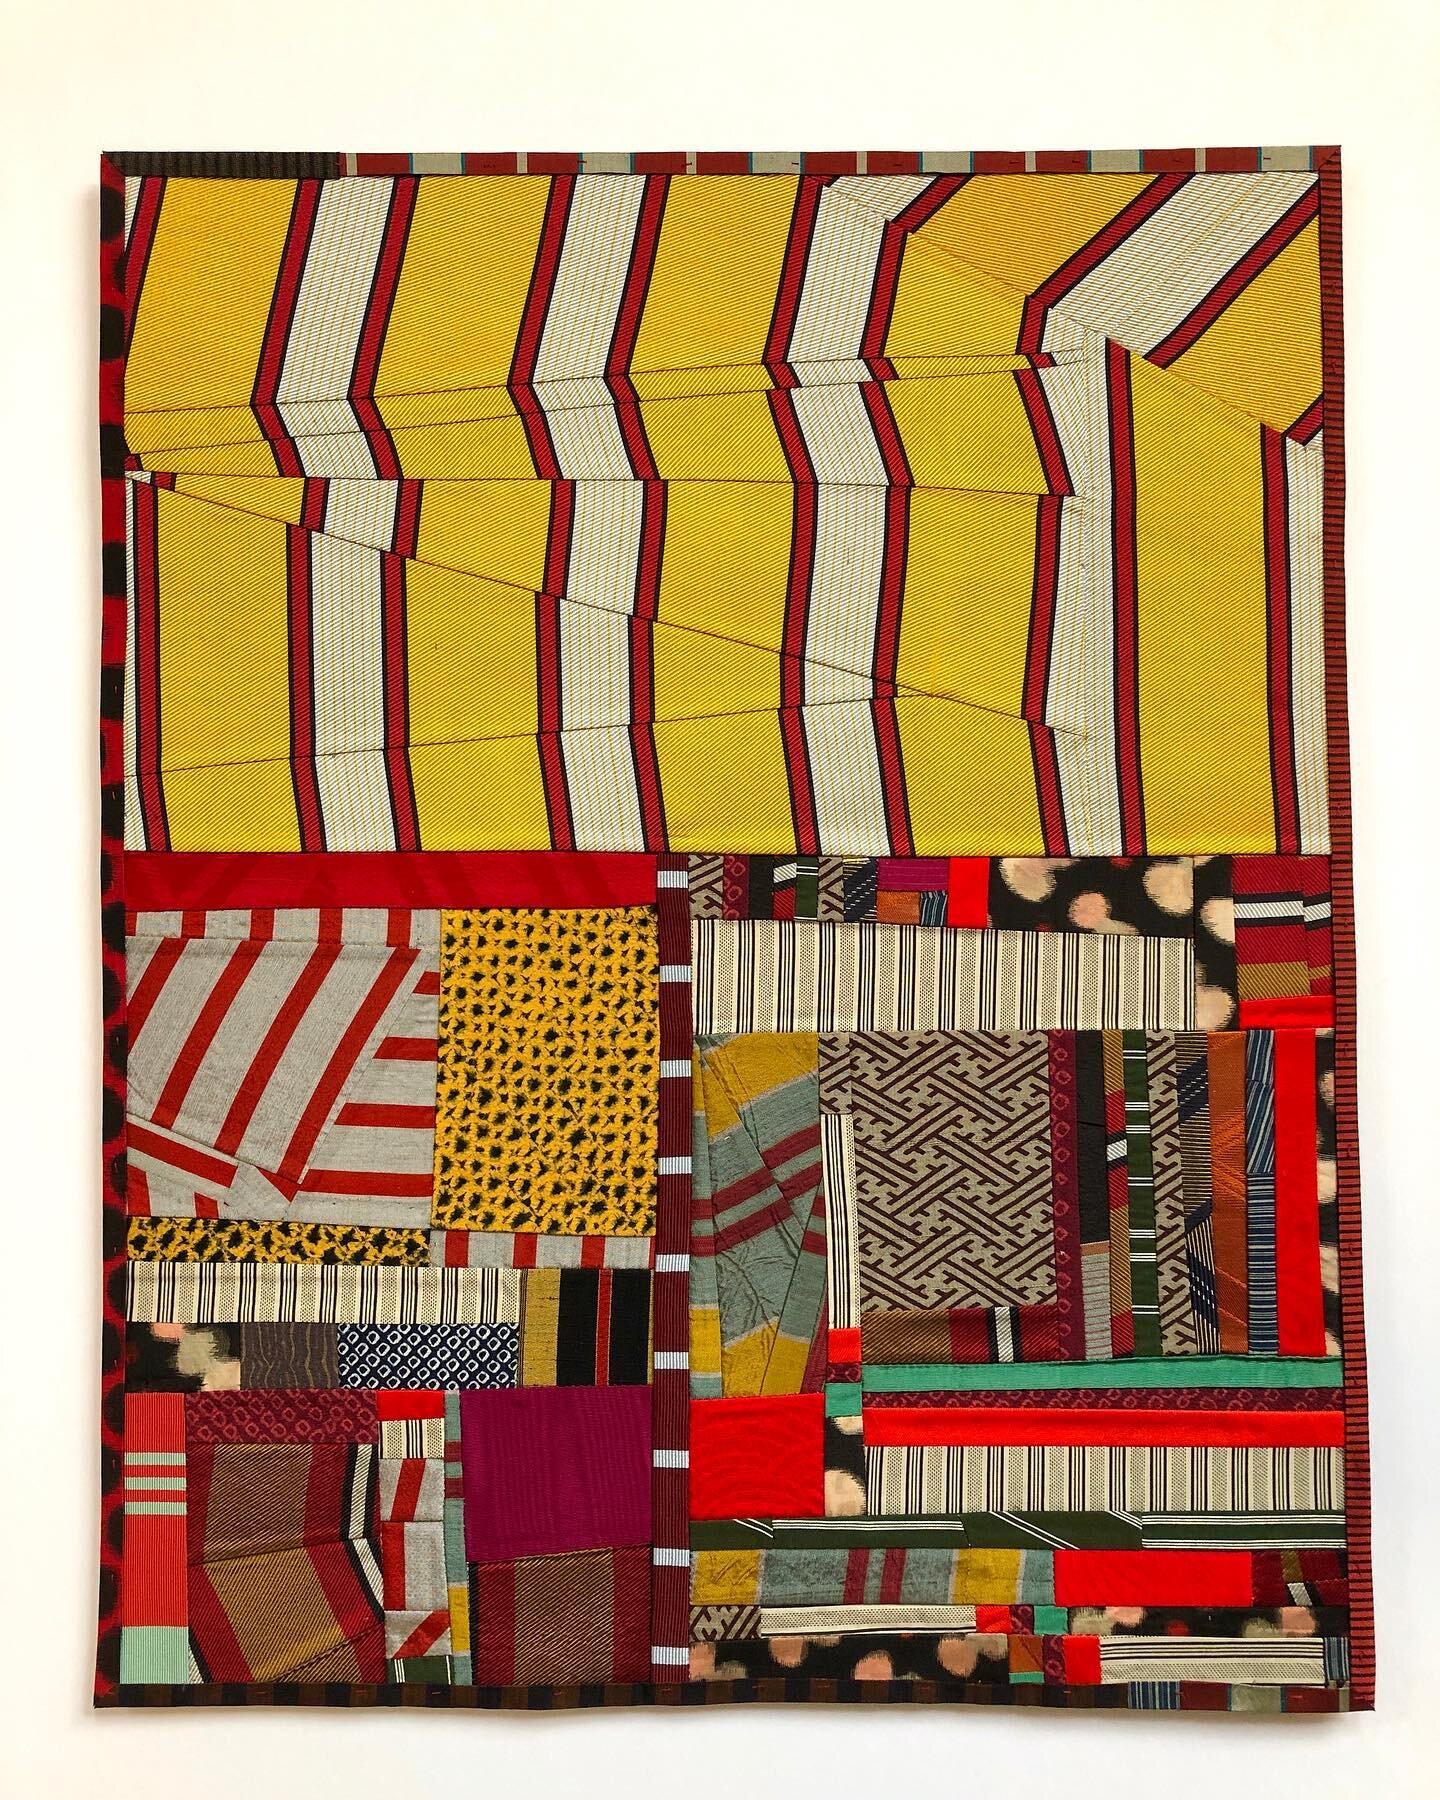 Taking Stories, 01
Pieced Vintage Silk
25.75 x 21.75 inch
2019

From my fall show Seeking Balance @hawcontemporary 

The first in a series of colorful new works was collected by one KCMO&rsquo;s  most enthusiastic/encouraging/prolific collectors of a